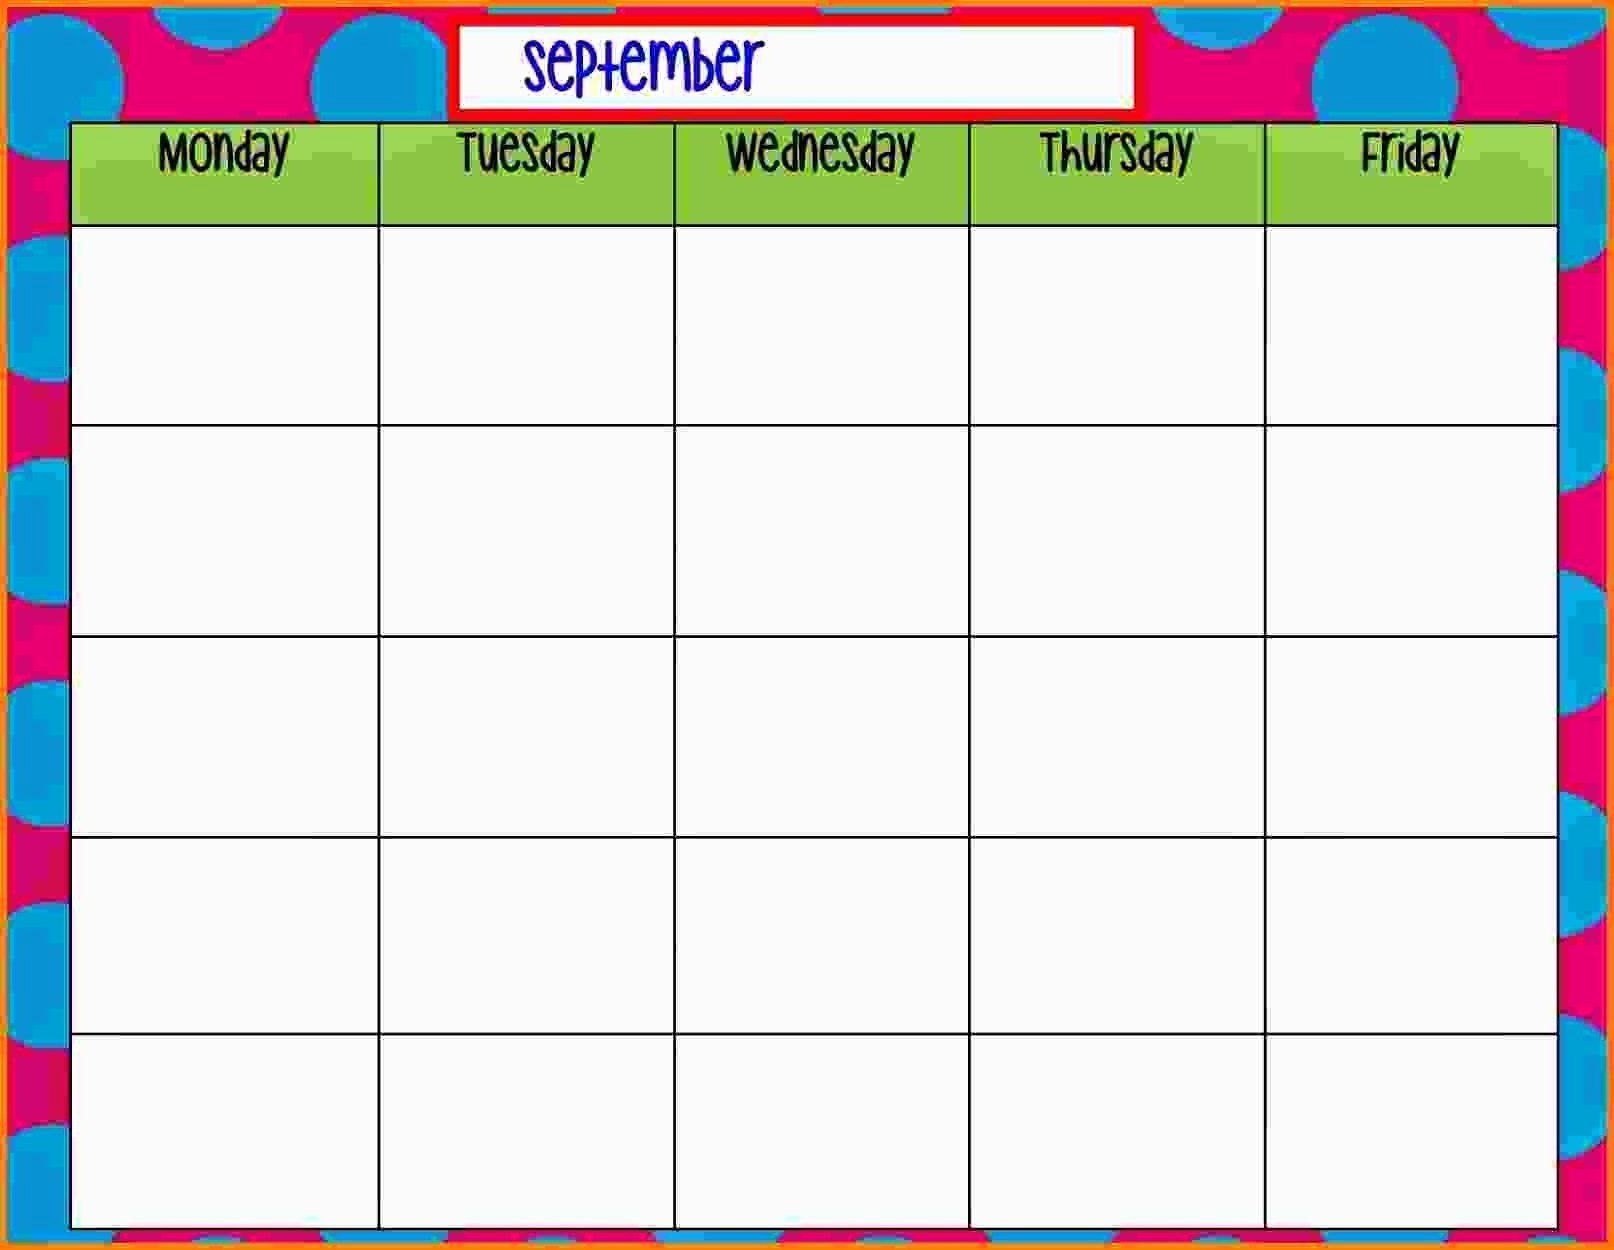 monday to friday schedule template fresh free printable